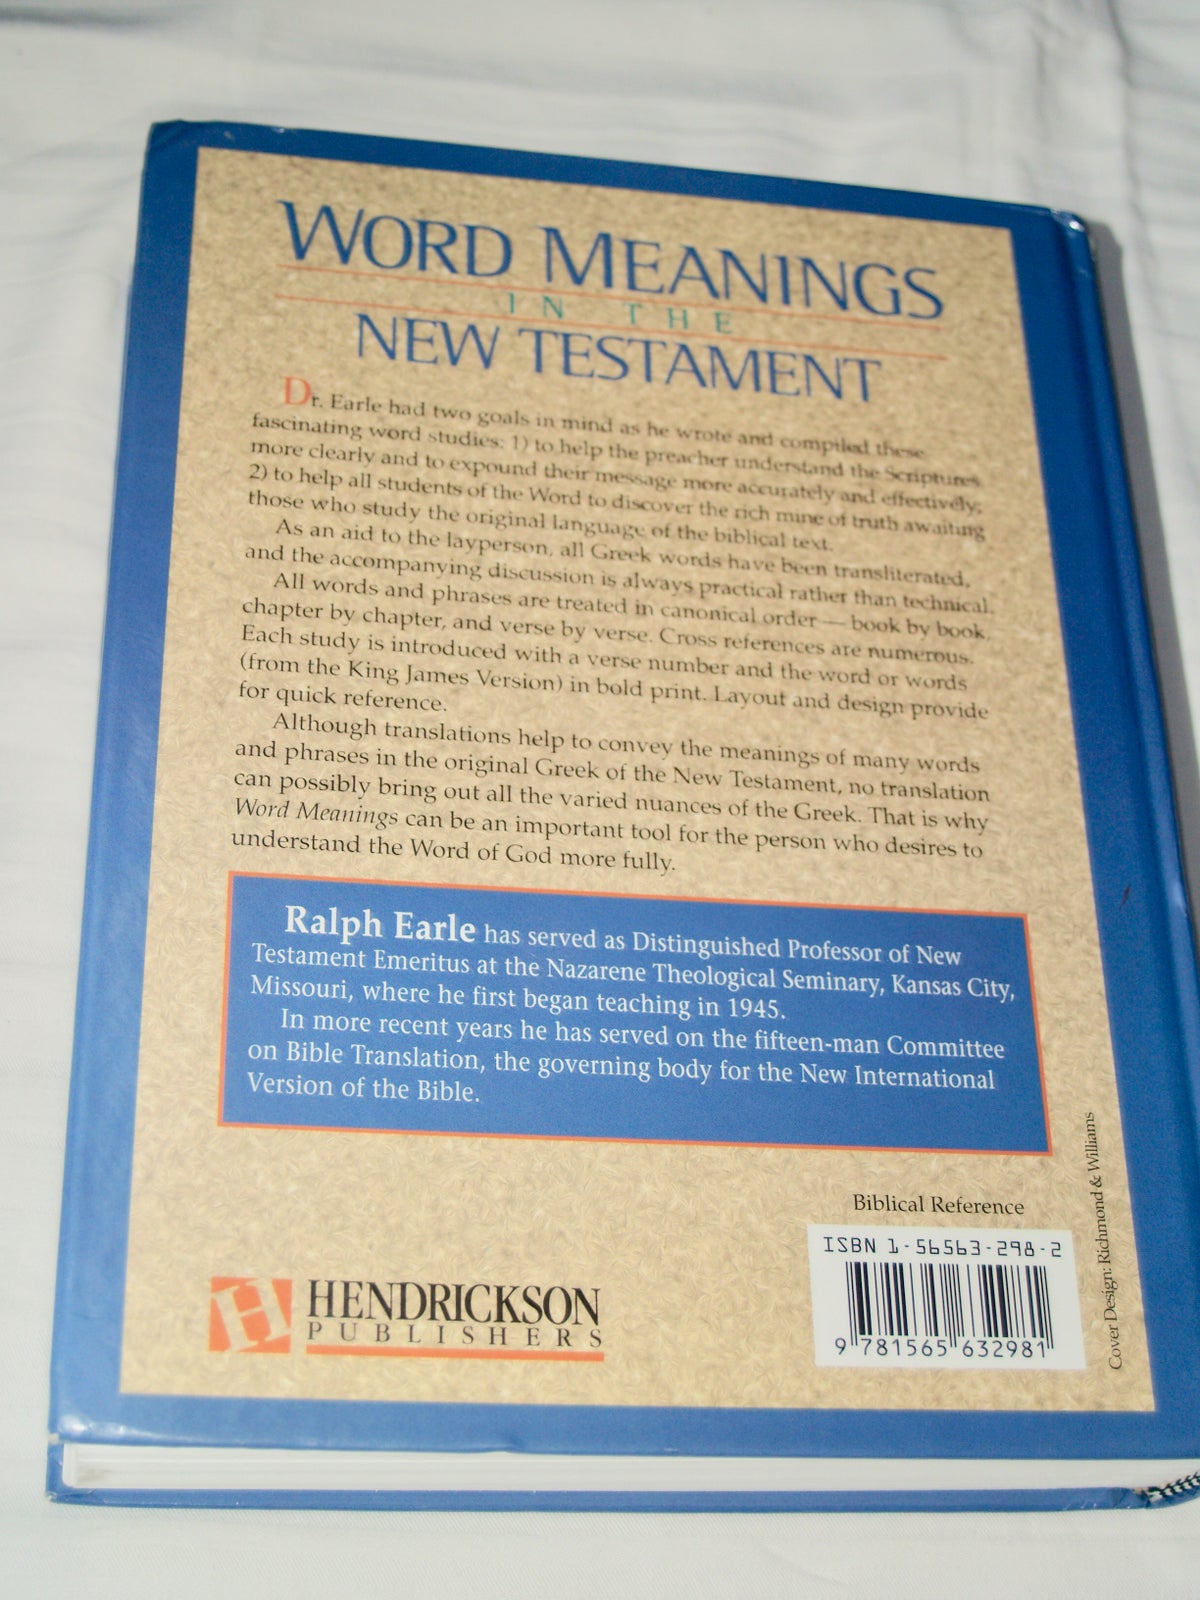 Word Meanings, in the New Testament